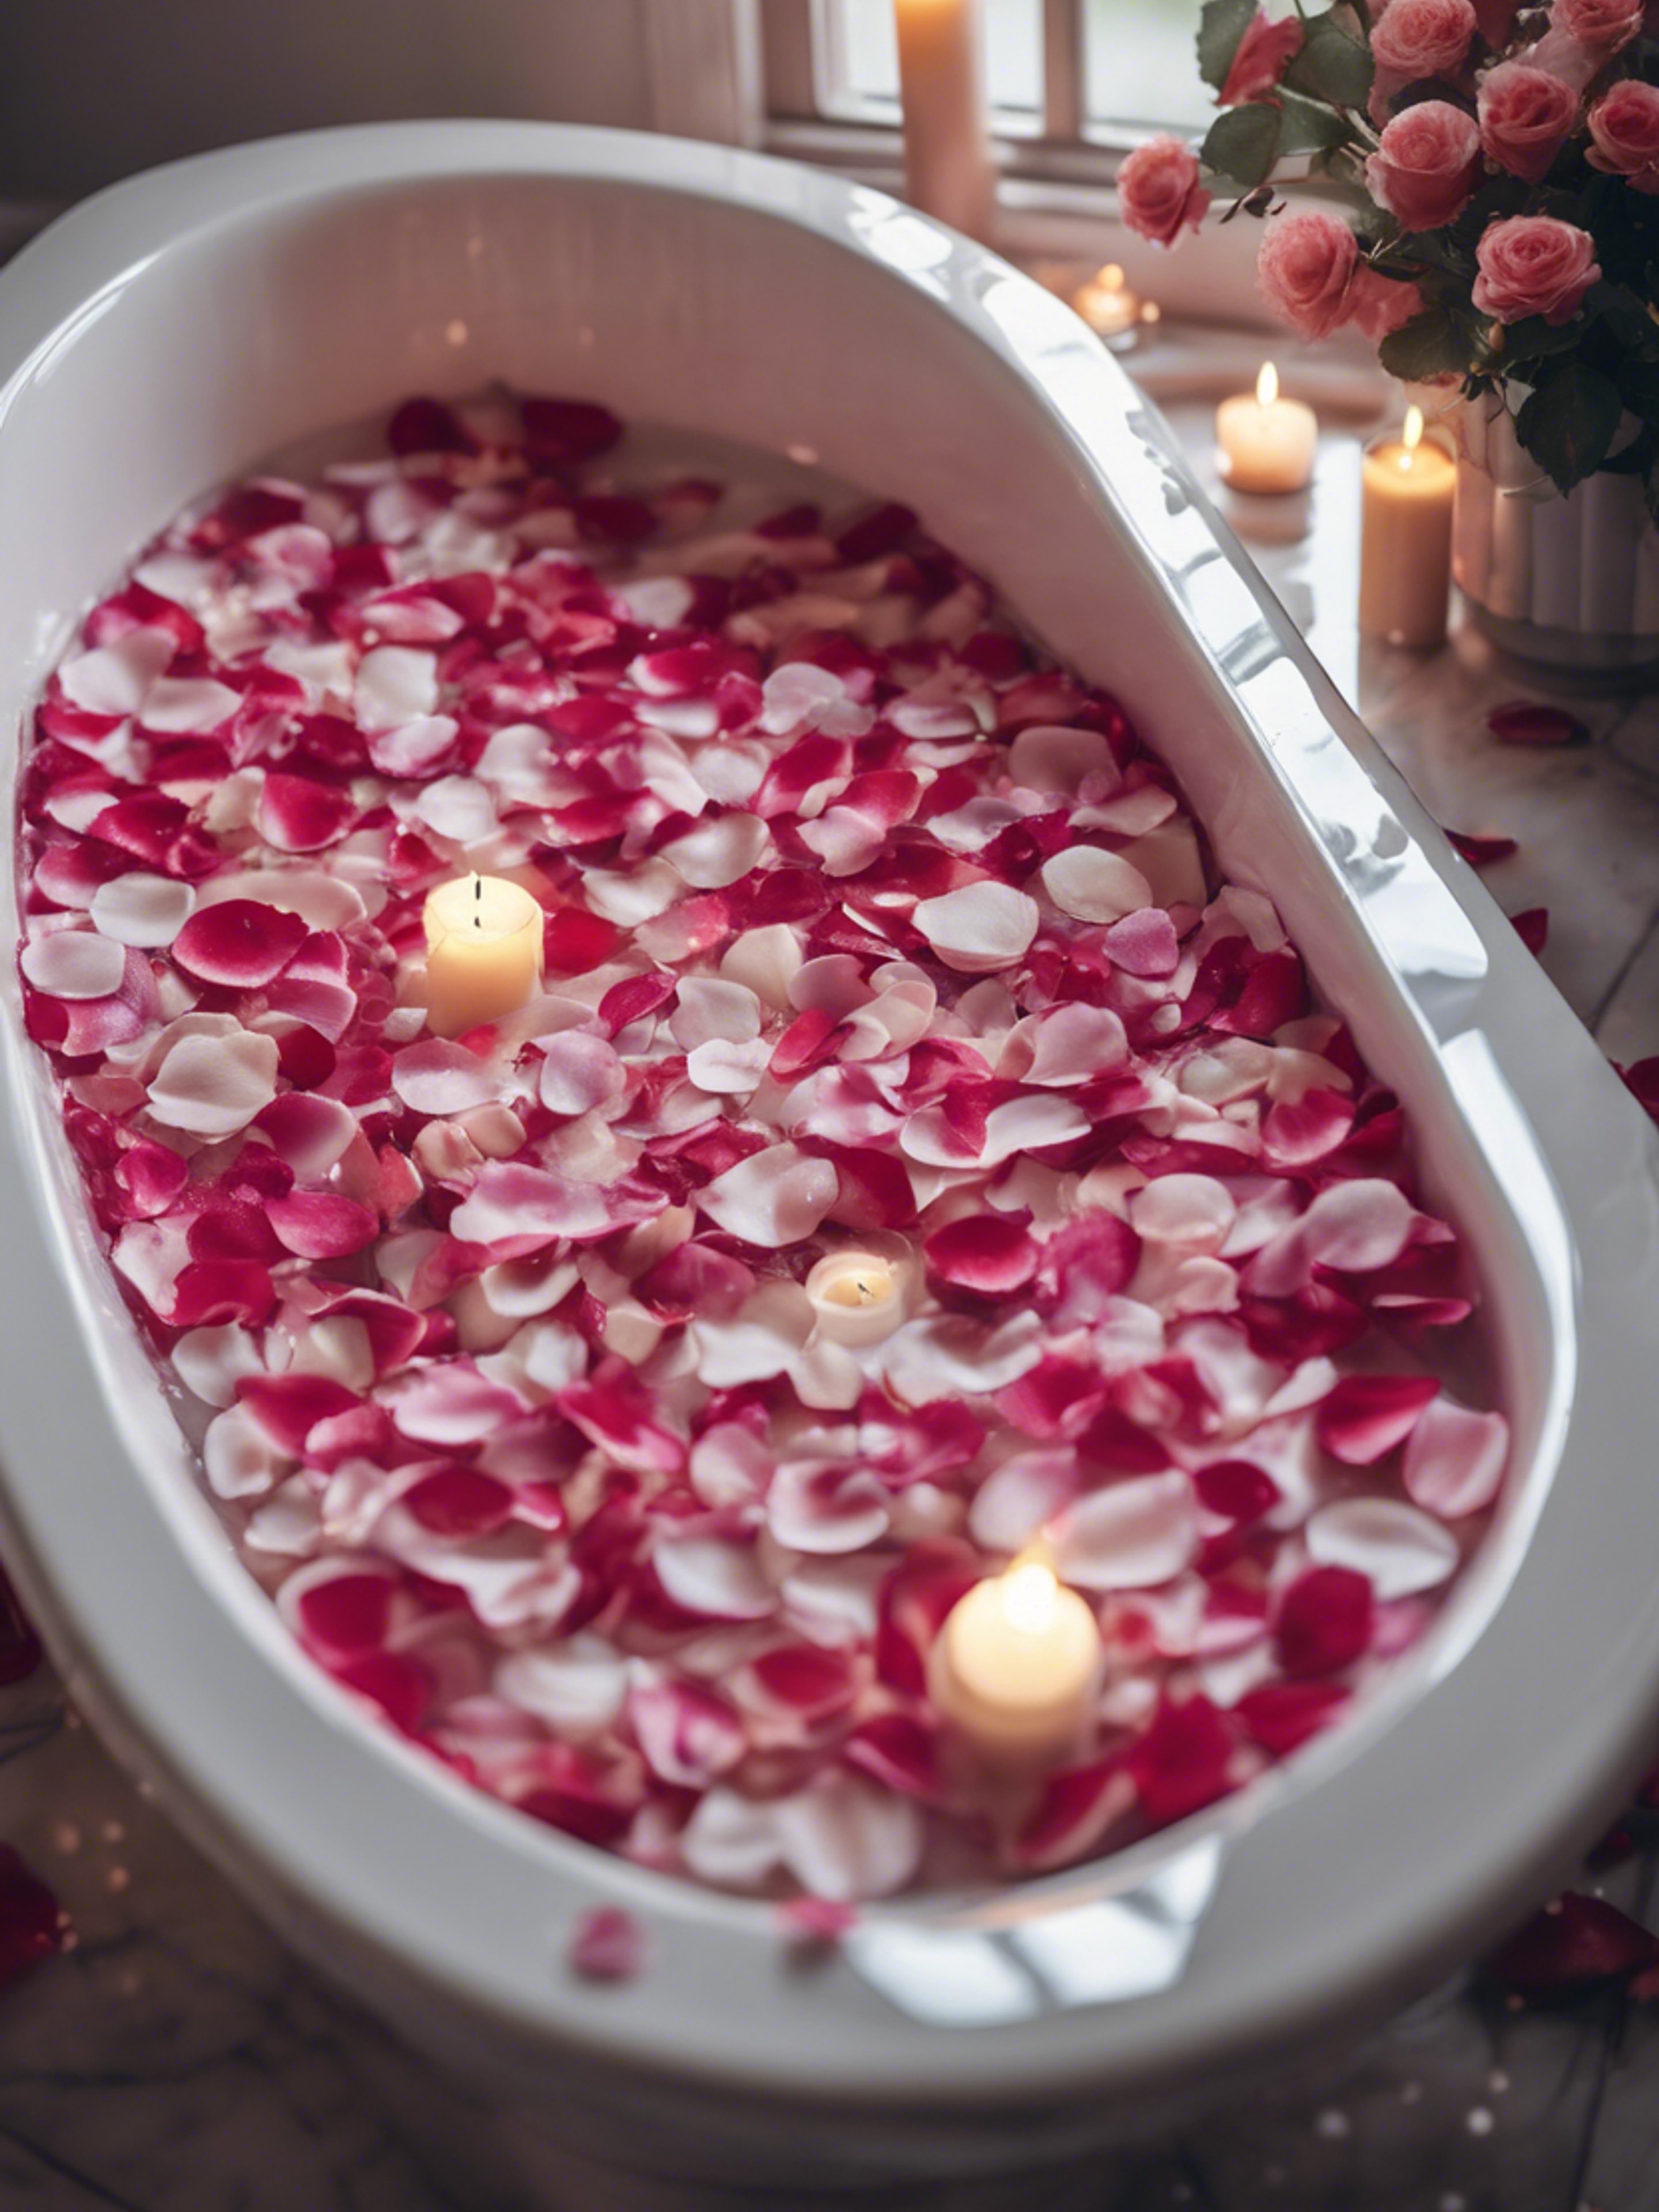 An inviting bubble bath in a white tub with rose petals and candles around the edge of the tub. Hintergrund[29454076f2ac4acb9df8]